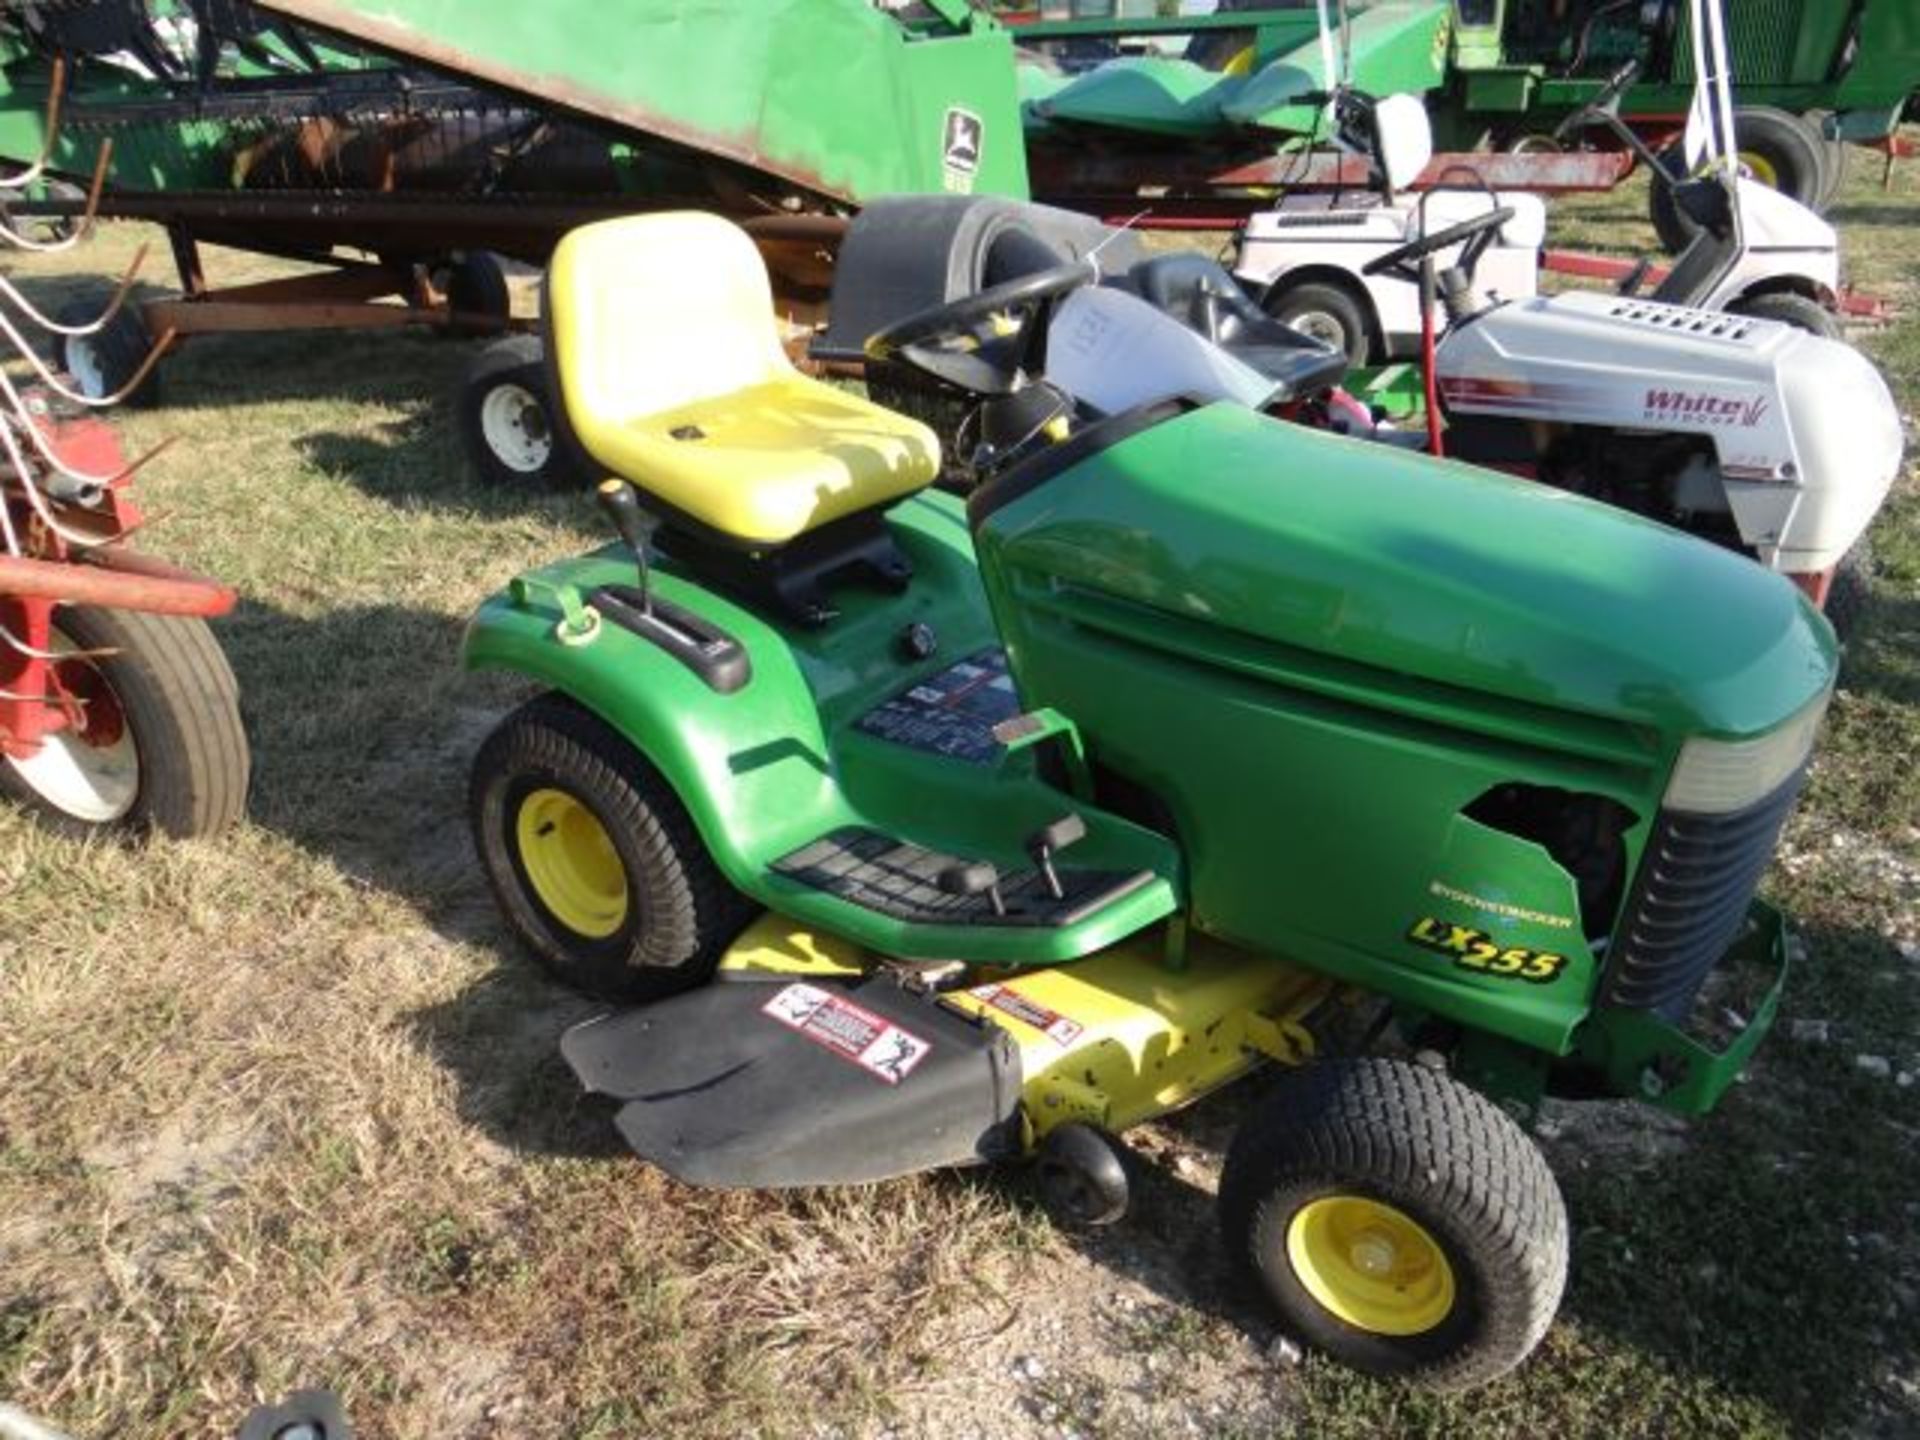 JD LX255 Riding Mower, 2000 #65784, 15hp, Air Cooled, Hydro, 42" Deck - Image 2 of 3